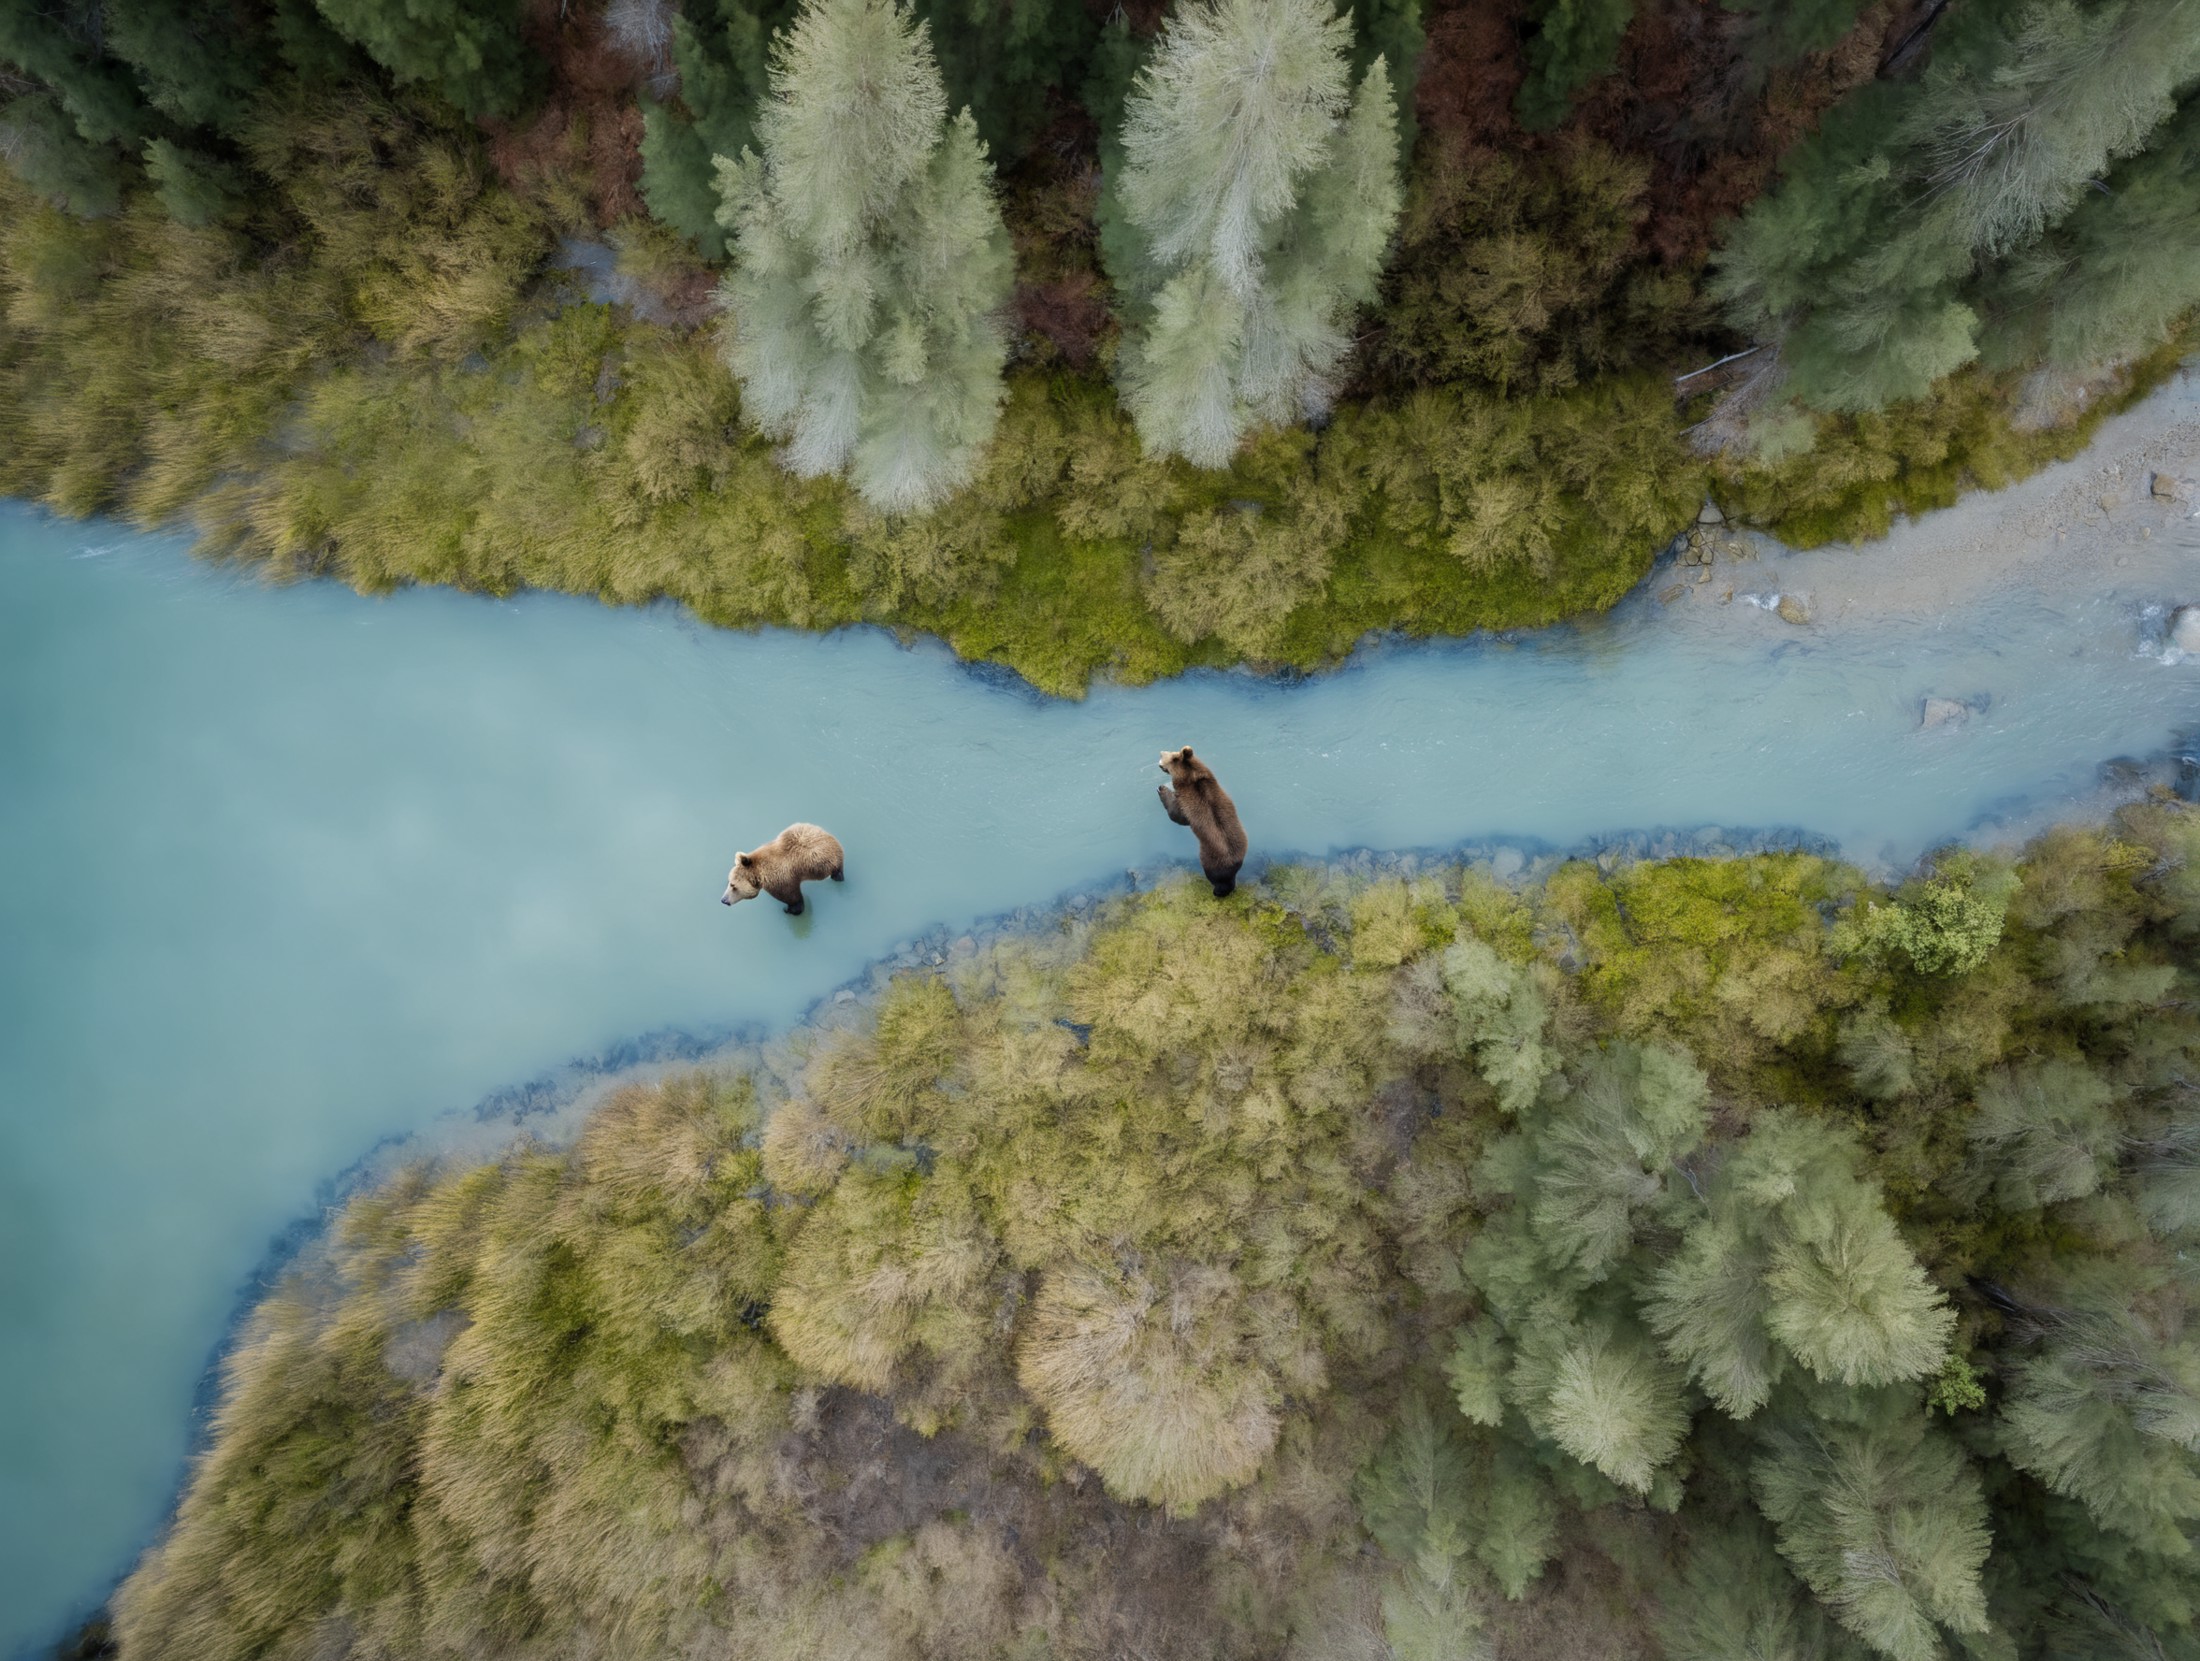 <lora:drone_photo_v1.0_XL:0.8>
a bear standing in a river in a forest